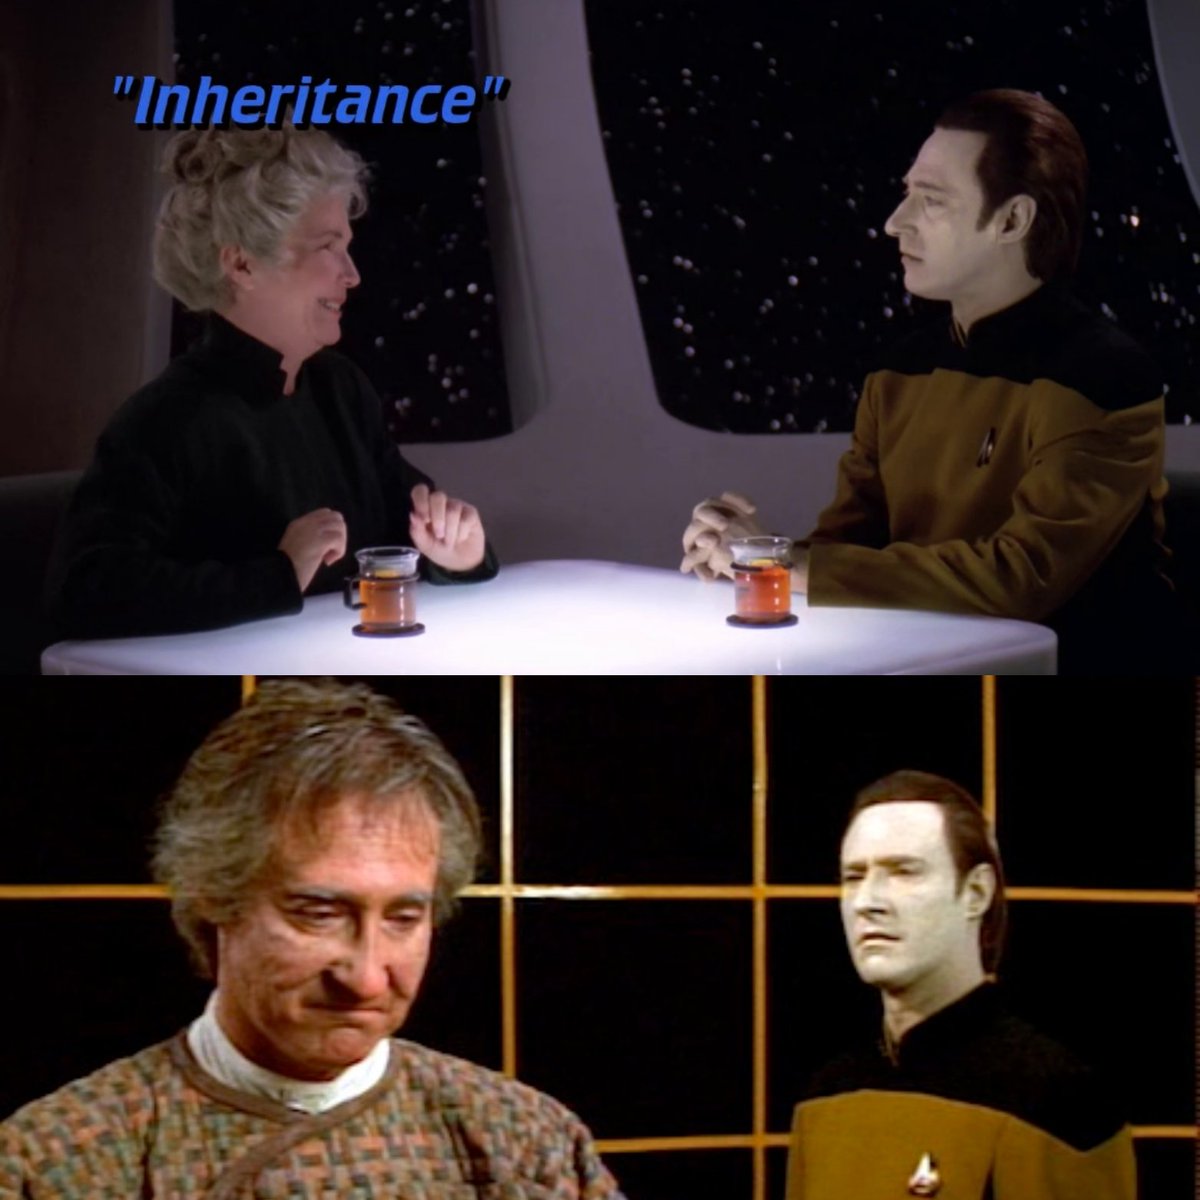 Happy #TrekTuesday and good morning! We accidentally skipped it but trust me: #StarTrekTheNextGeneration #S7E10 #Inheritance is a magnificent #Data #WATCH bolstered by great performances.

#diyentertainment #BrentSpiner #TNG #FionnulaFlanagan #NoonienSoong #7x10